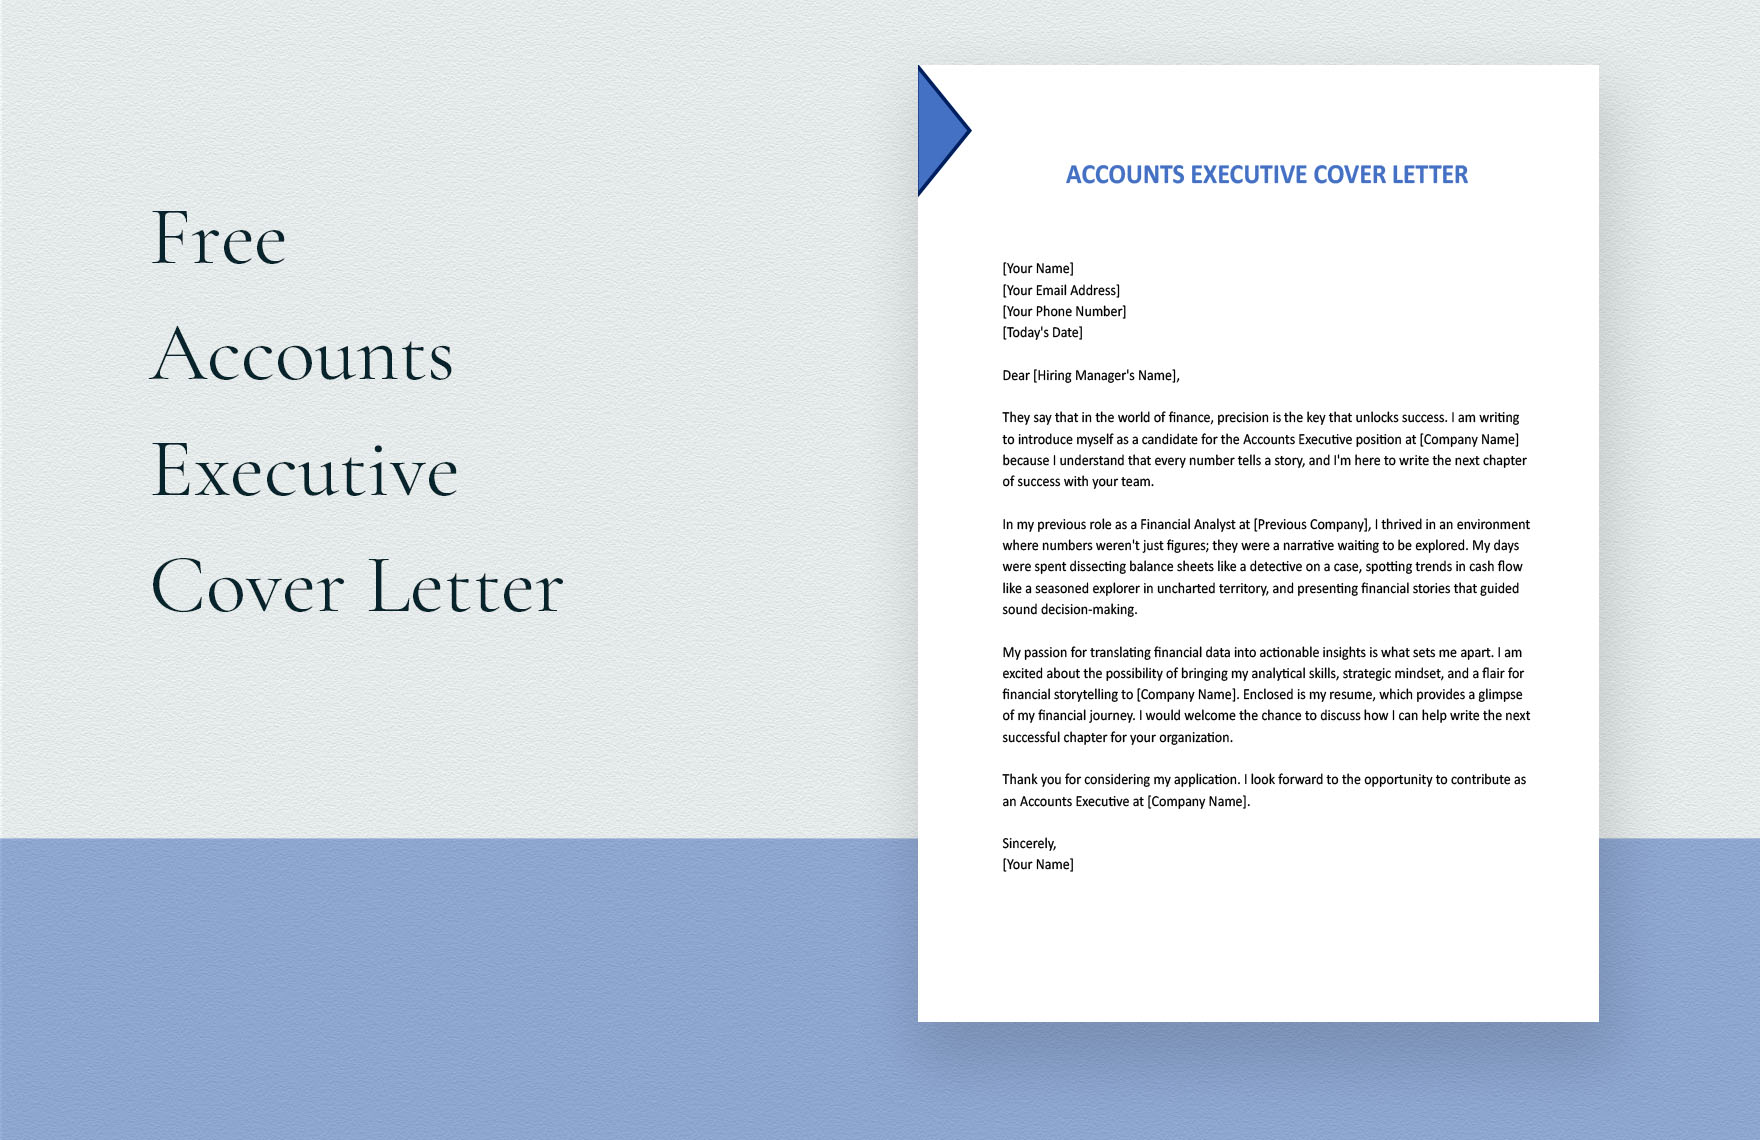 Accounts Executive Cover Letter